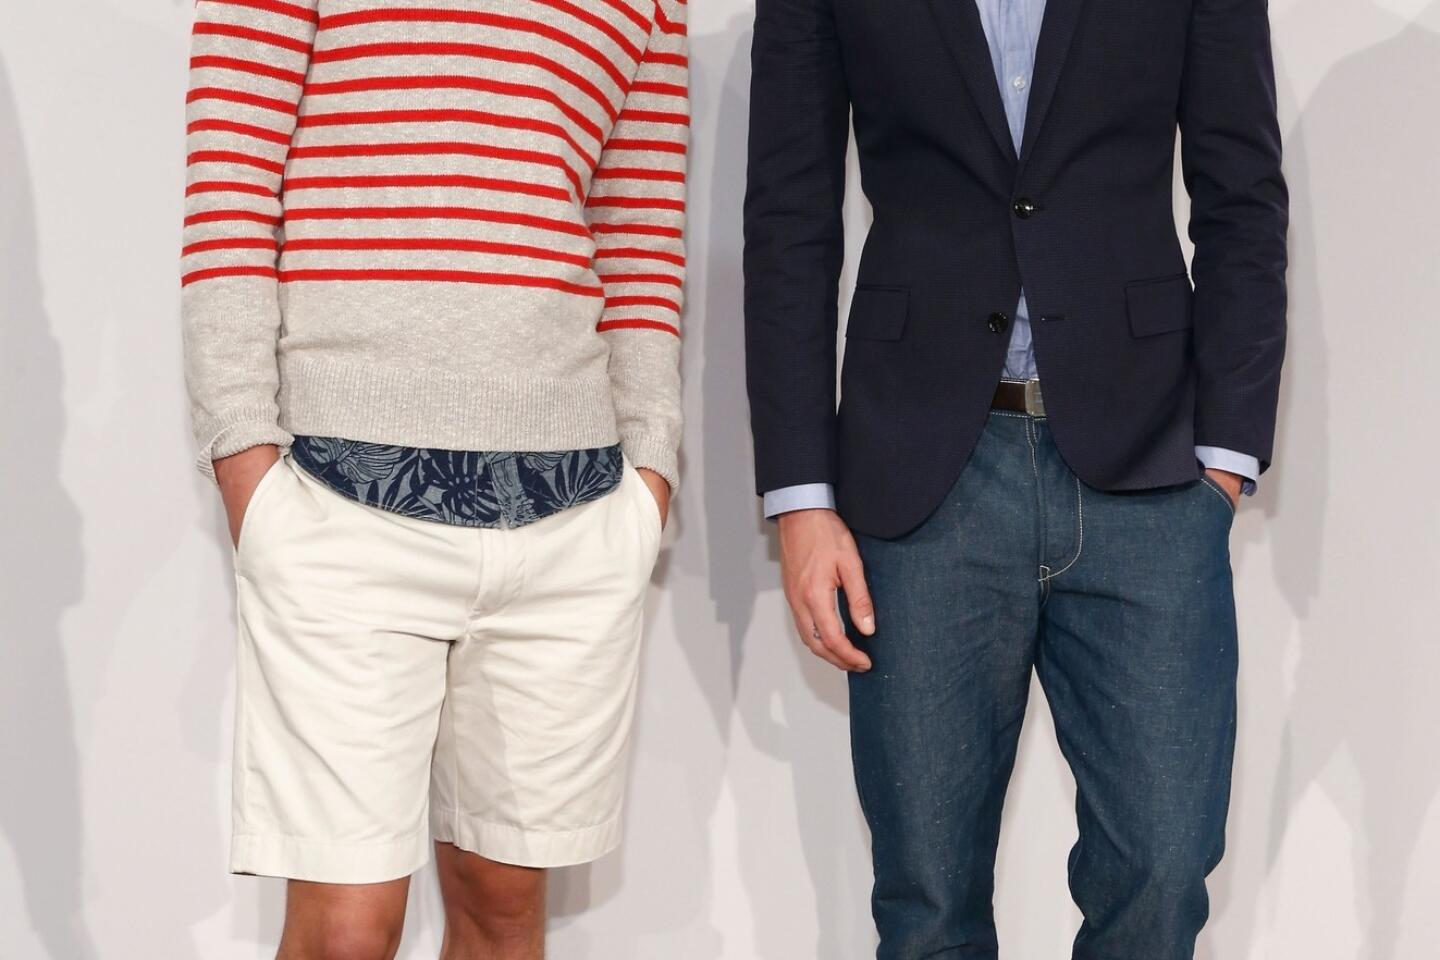 J.Crew and Frank Muytjens Have Parted Ways